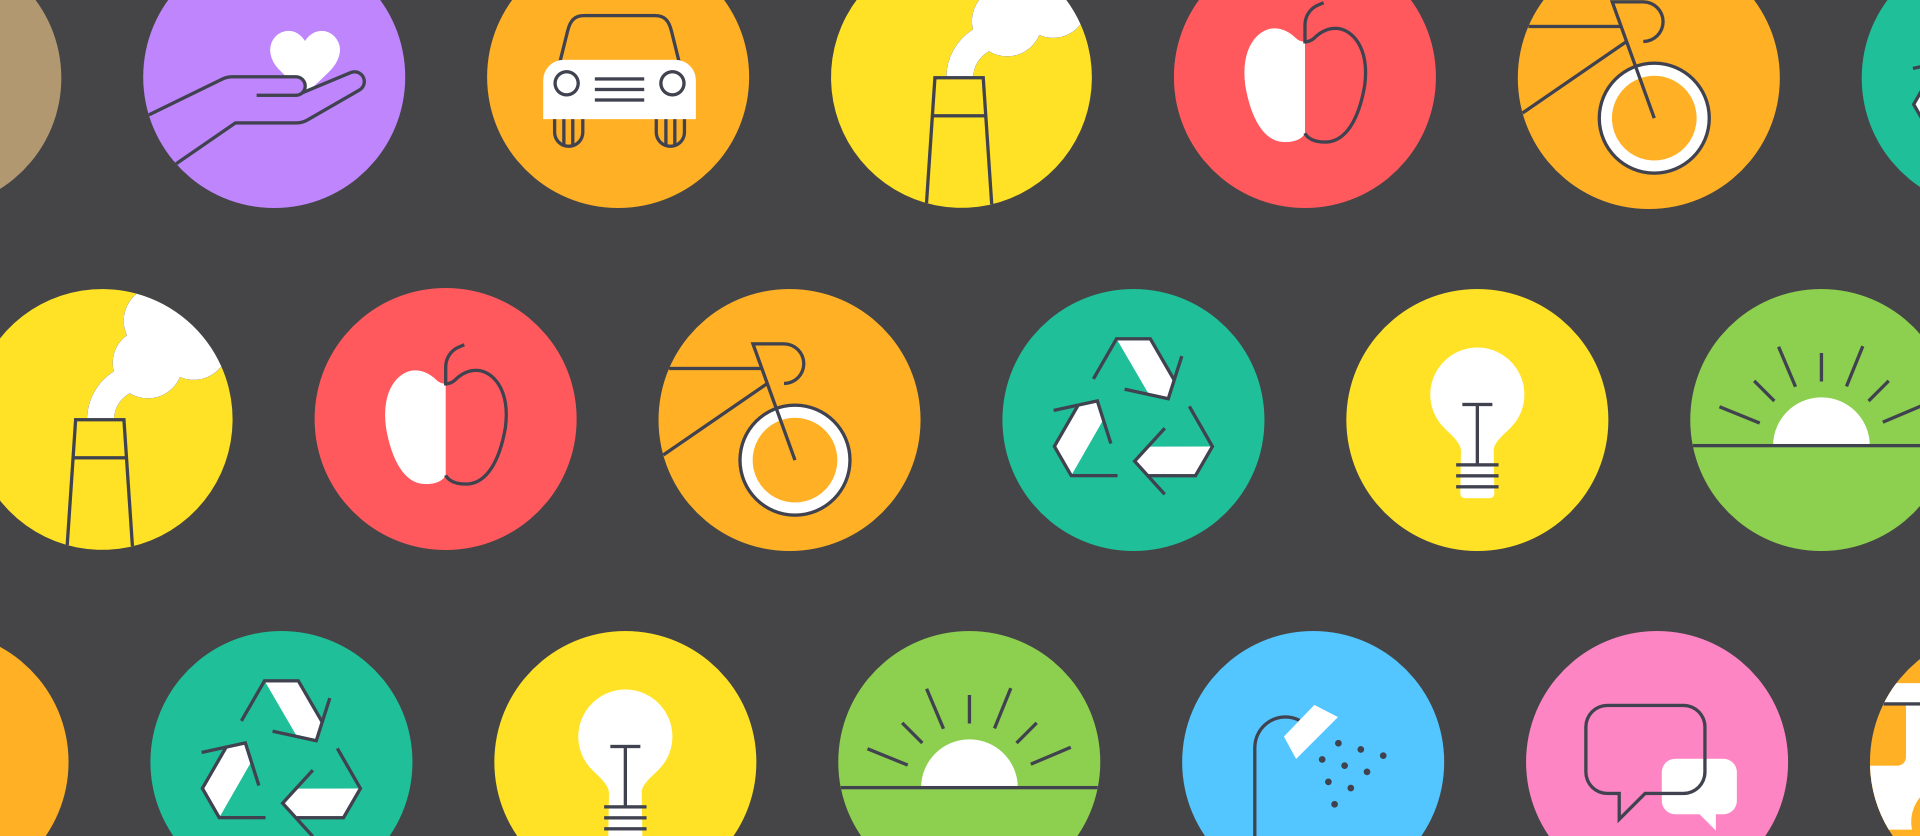 A set of colorful icons depicting environmental topics.